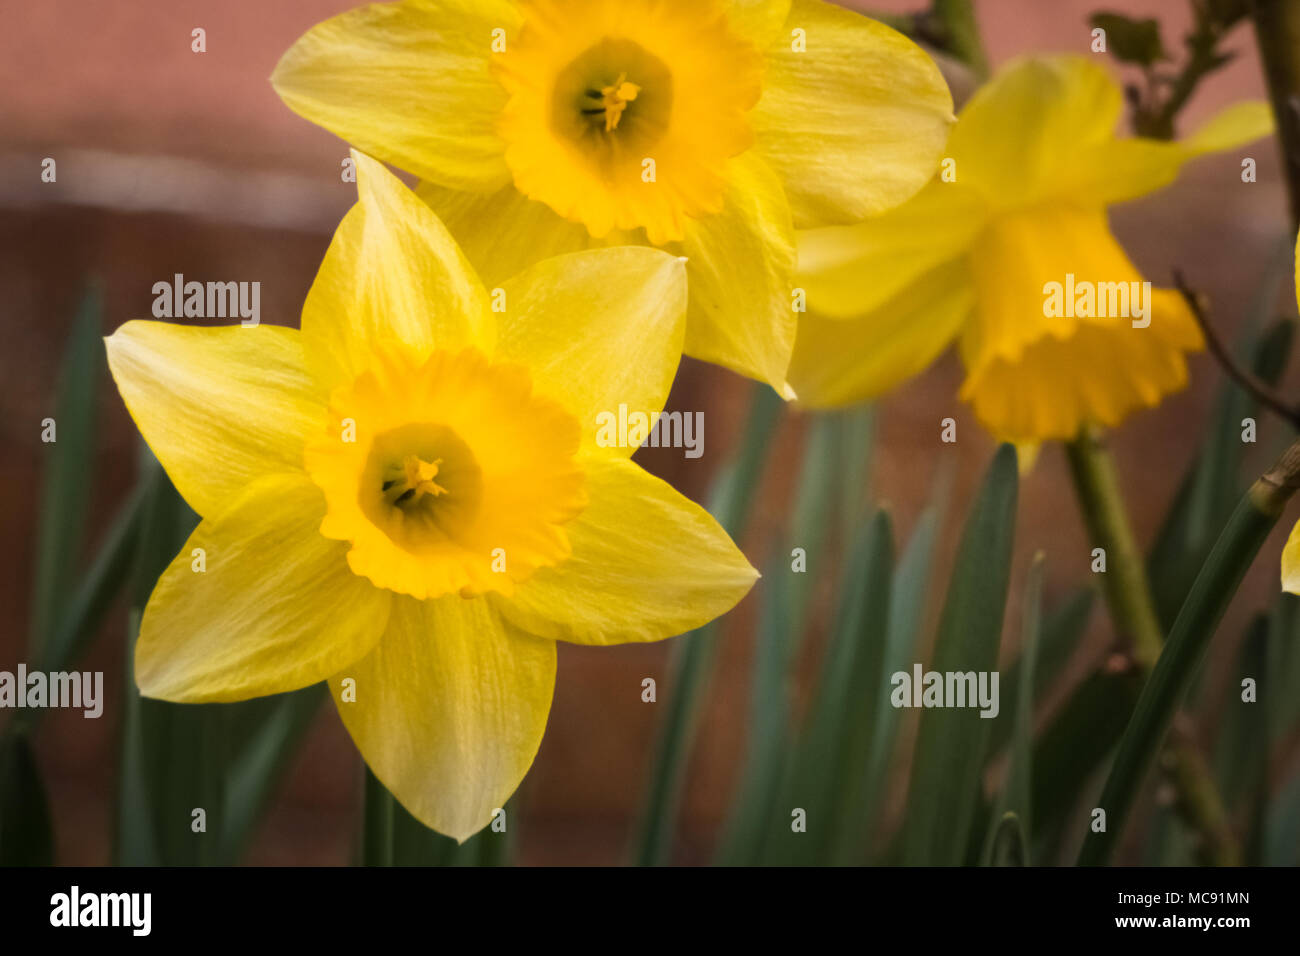 Springtime yellow Narcissus flowers blooming in the garden. Stock Photo